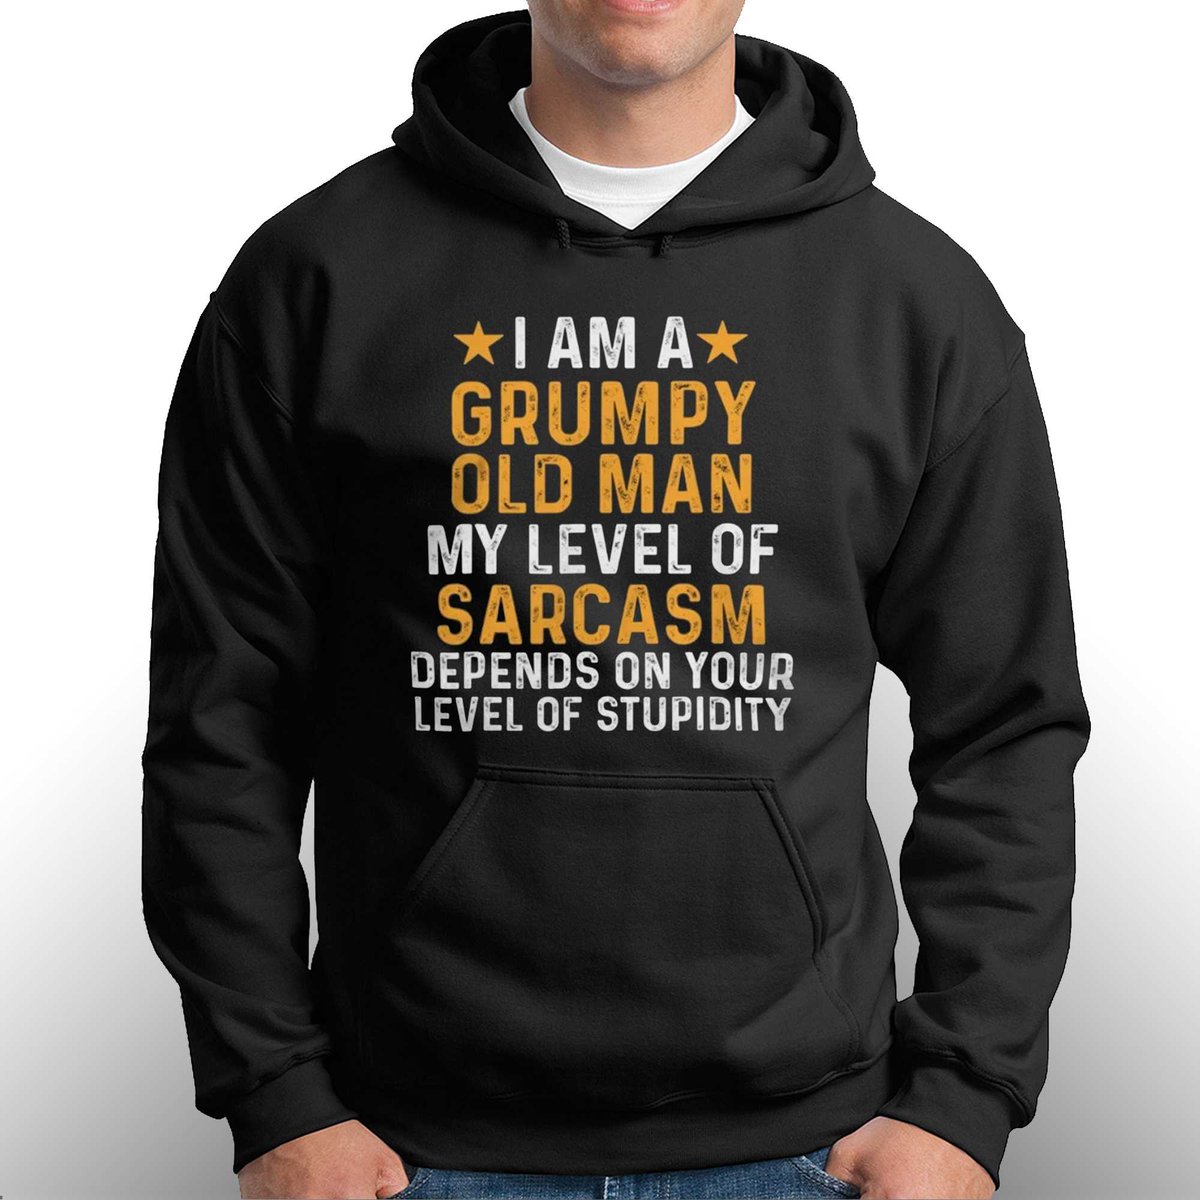 I don't always wear a T-shirt that says 'grumpy old man', but when I do it's because people keep testing my patience👨🏼‍💼 #cantstandstupidity #sarcasm #sorrynotsorry 
Get it ➡️ propertee.space/i-am-a-grumpy-…